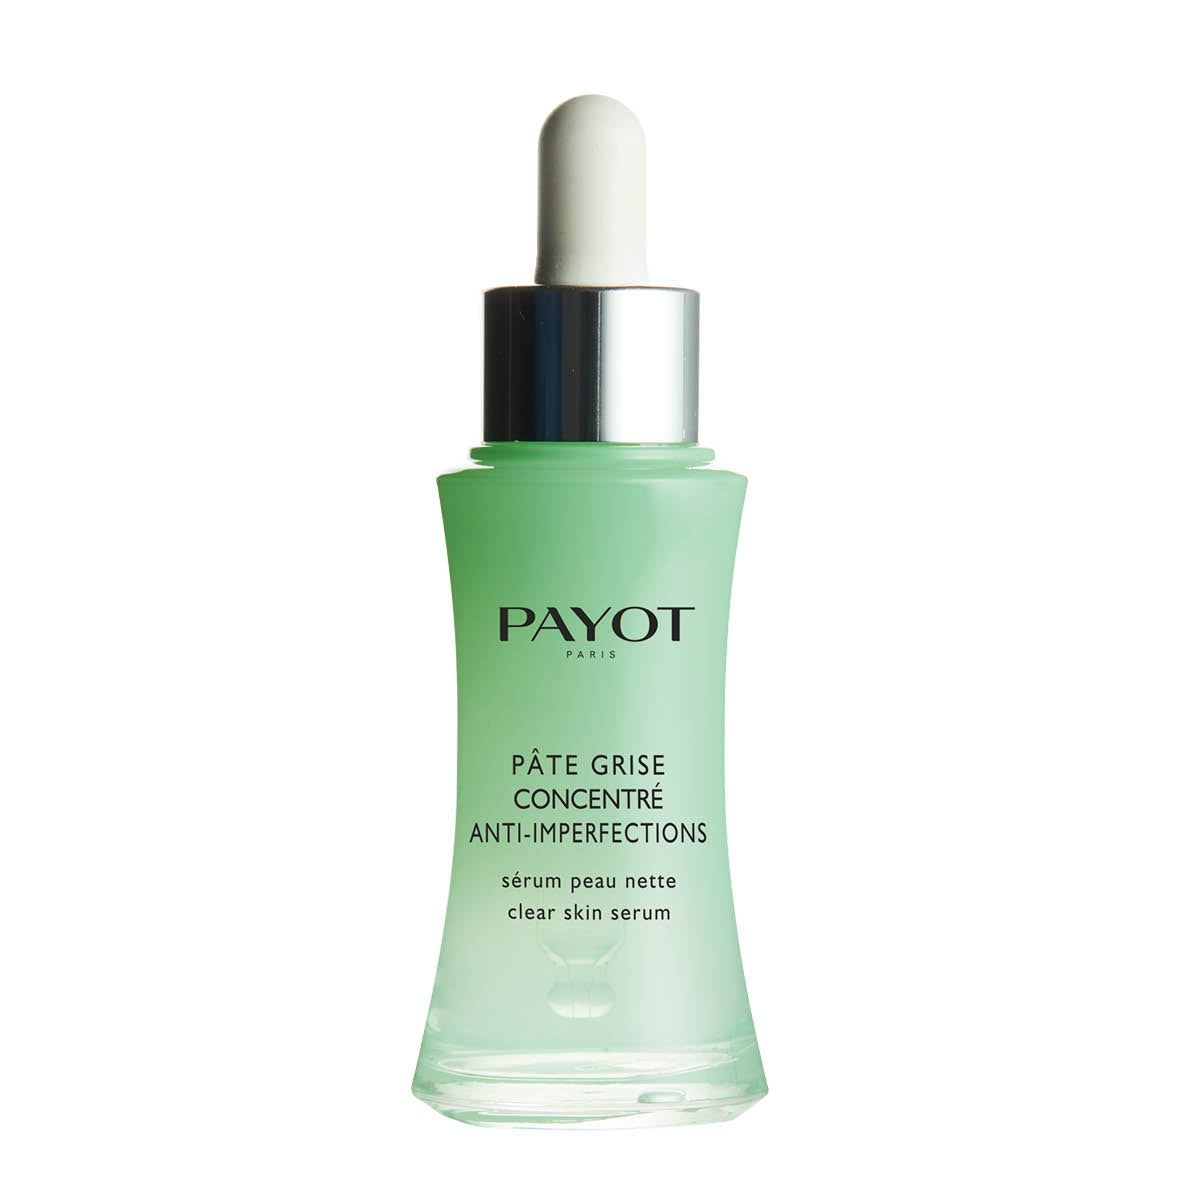 Payot Pate Grise Concentre Anti Imperfection 30ml